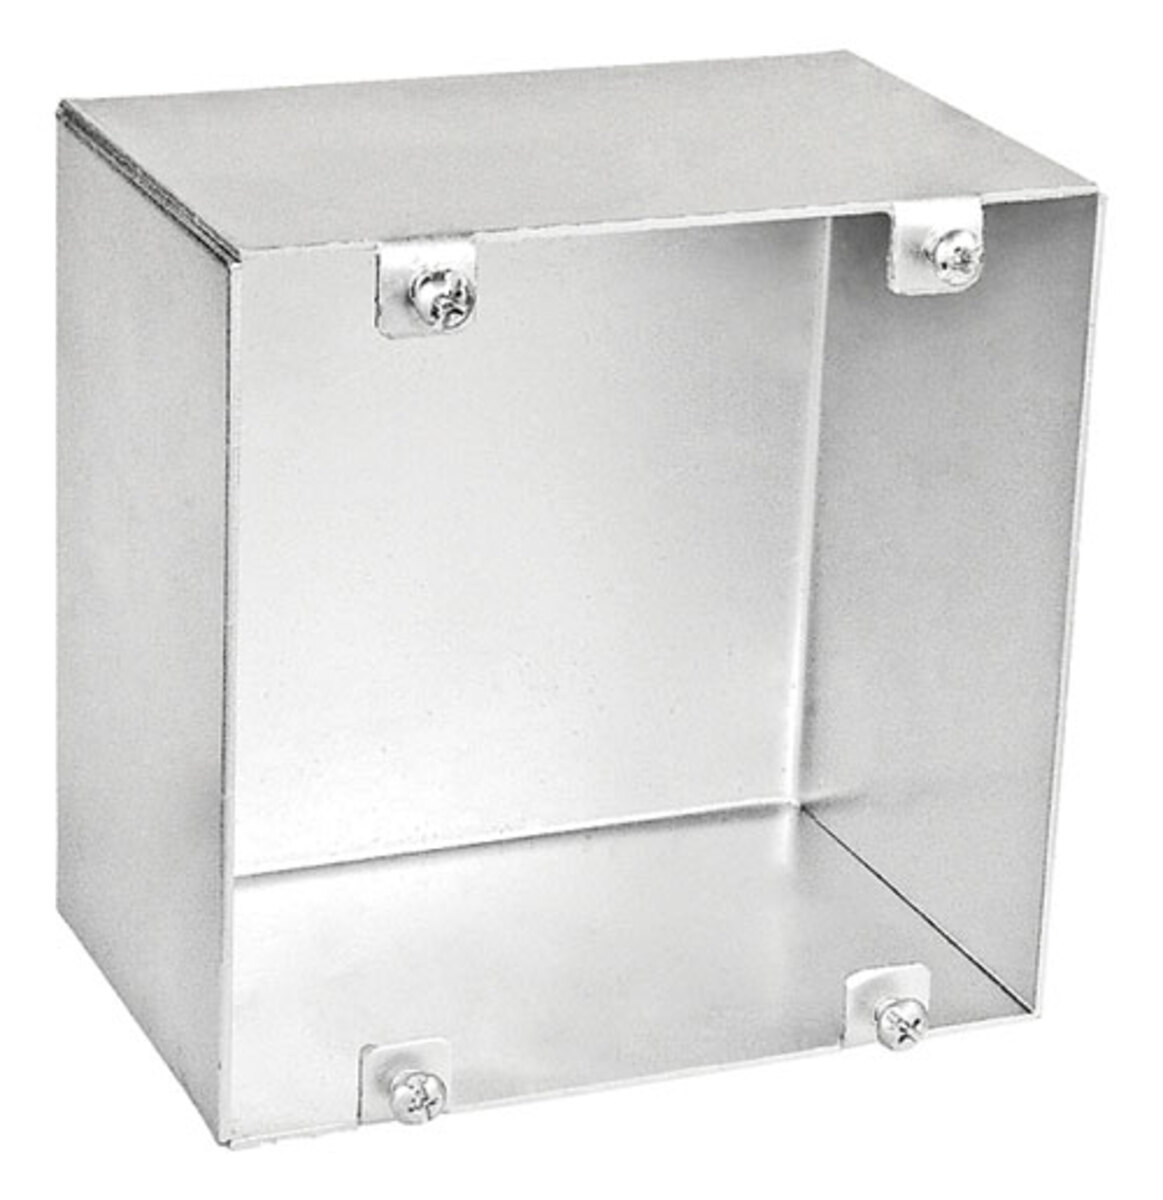 4-11/16" Square Box, 3" Deep - Welded, No Knockouts